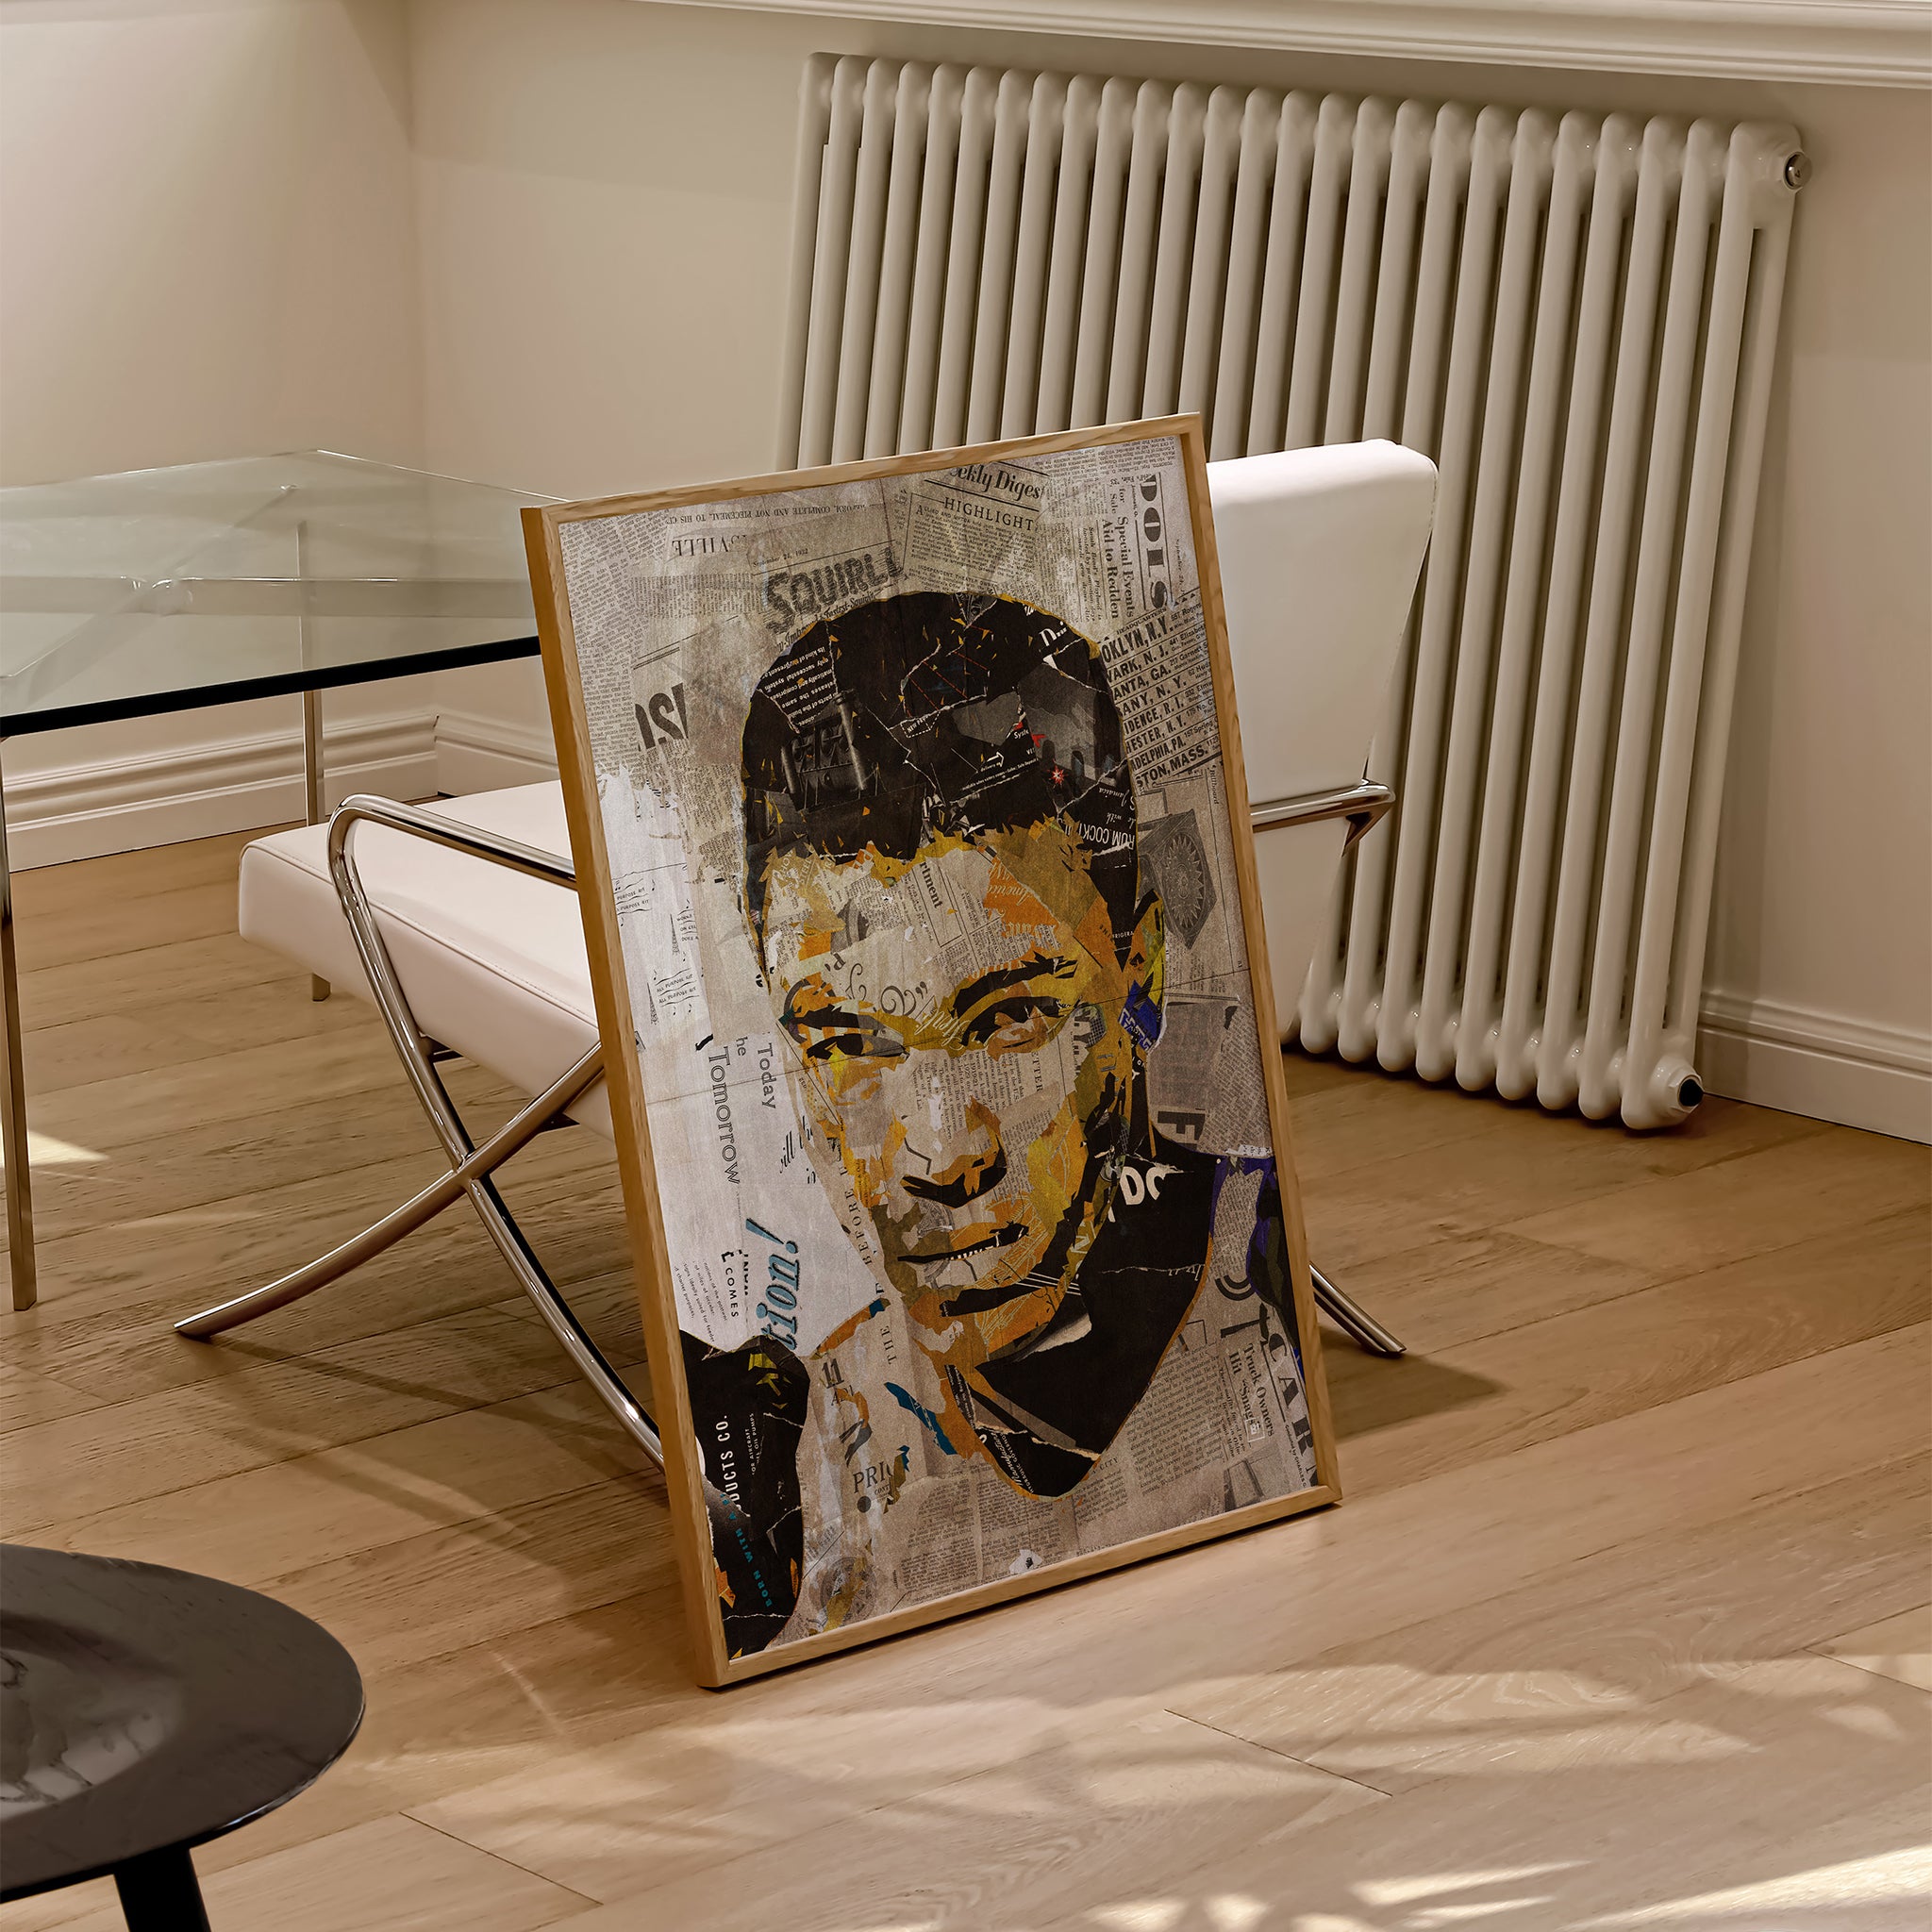 Be inspired by our iconic collage portrait art print of Muhammad Ali. This artwork was printed using the giclée process on archival acid-free paper and is presented in a natural oak frame, capturing its timeless beauty in every detail.